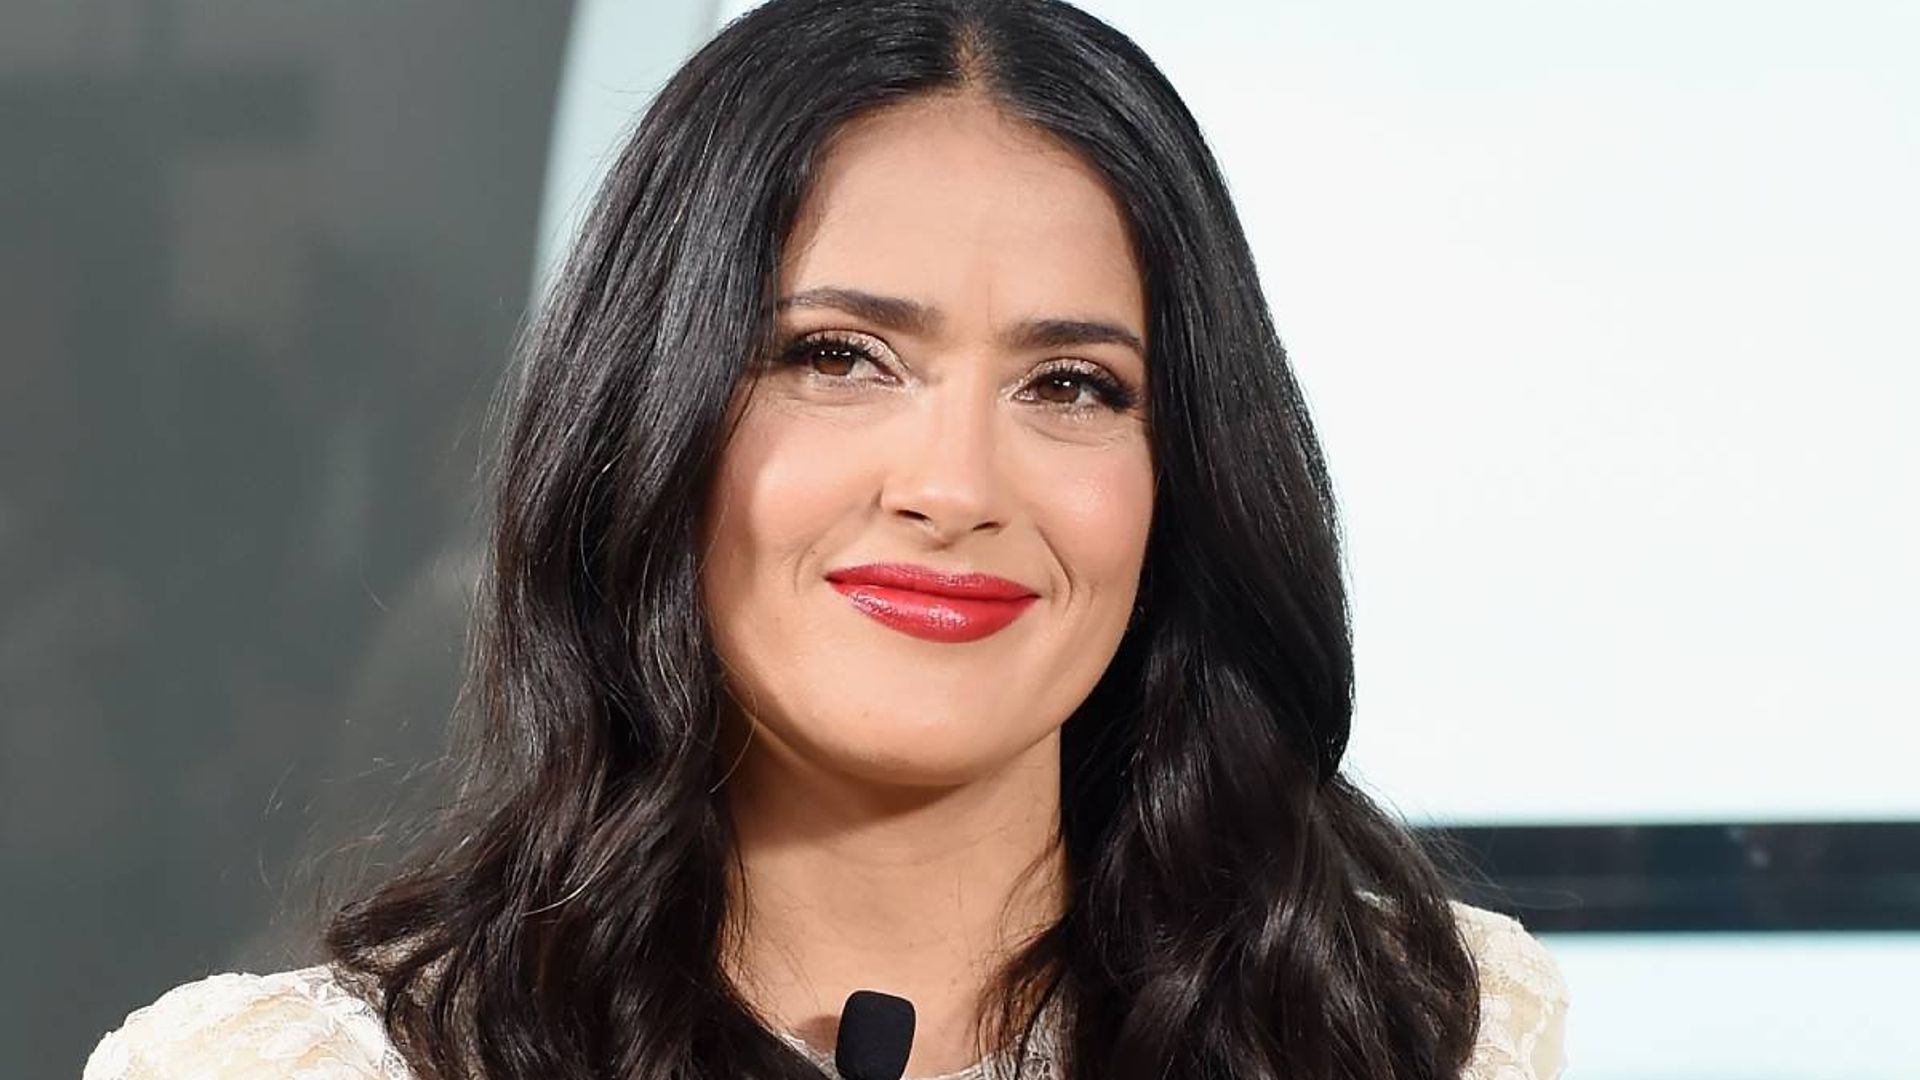 Salma Hayek Stuns Fans With Baby Bump Photo As She Marks Special Family Occasion Hello